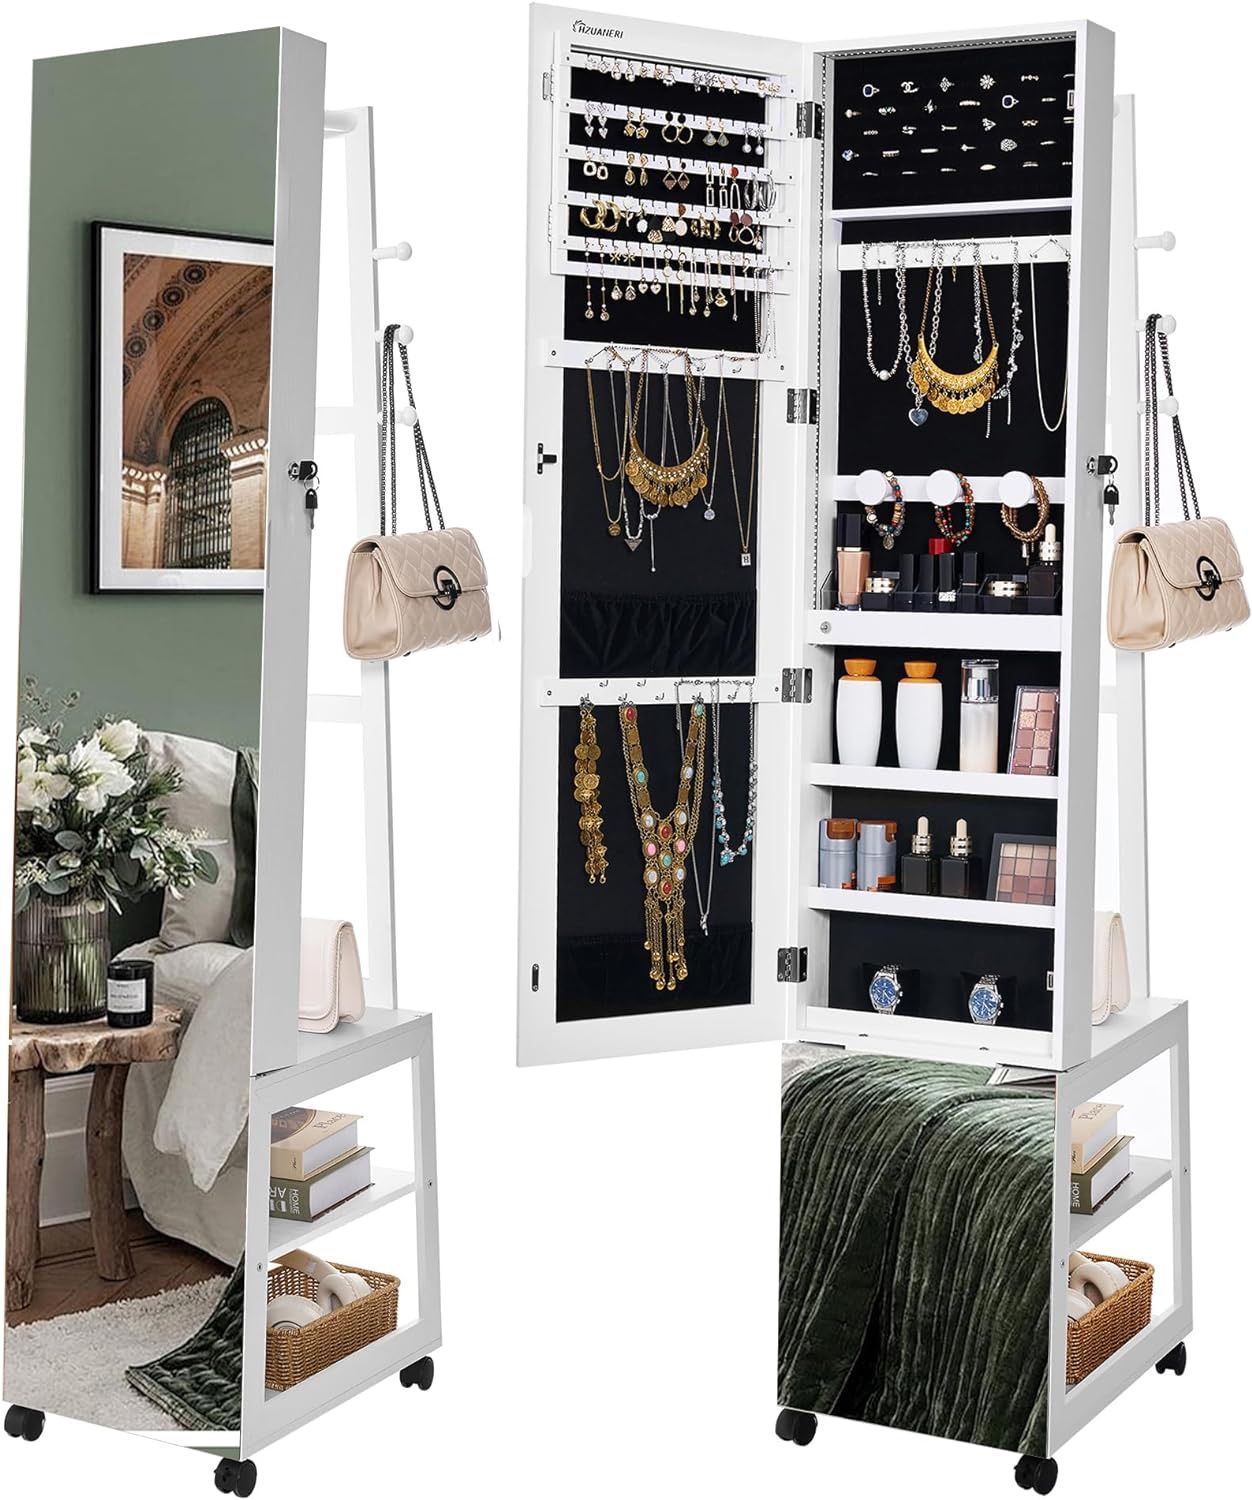 Jewelry Cabinet with Light strip, 66.5-inch mirror Jewelry Armoire Standing with Garment Rack,Movable Full-length Mirror with Wheels,Lockable Storage 